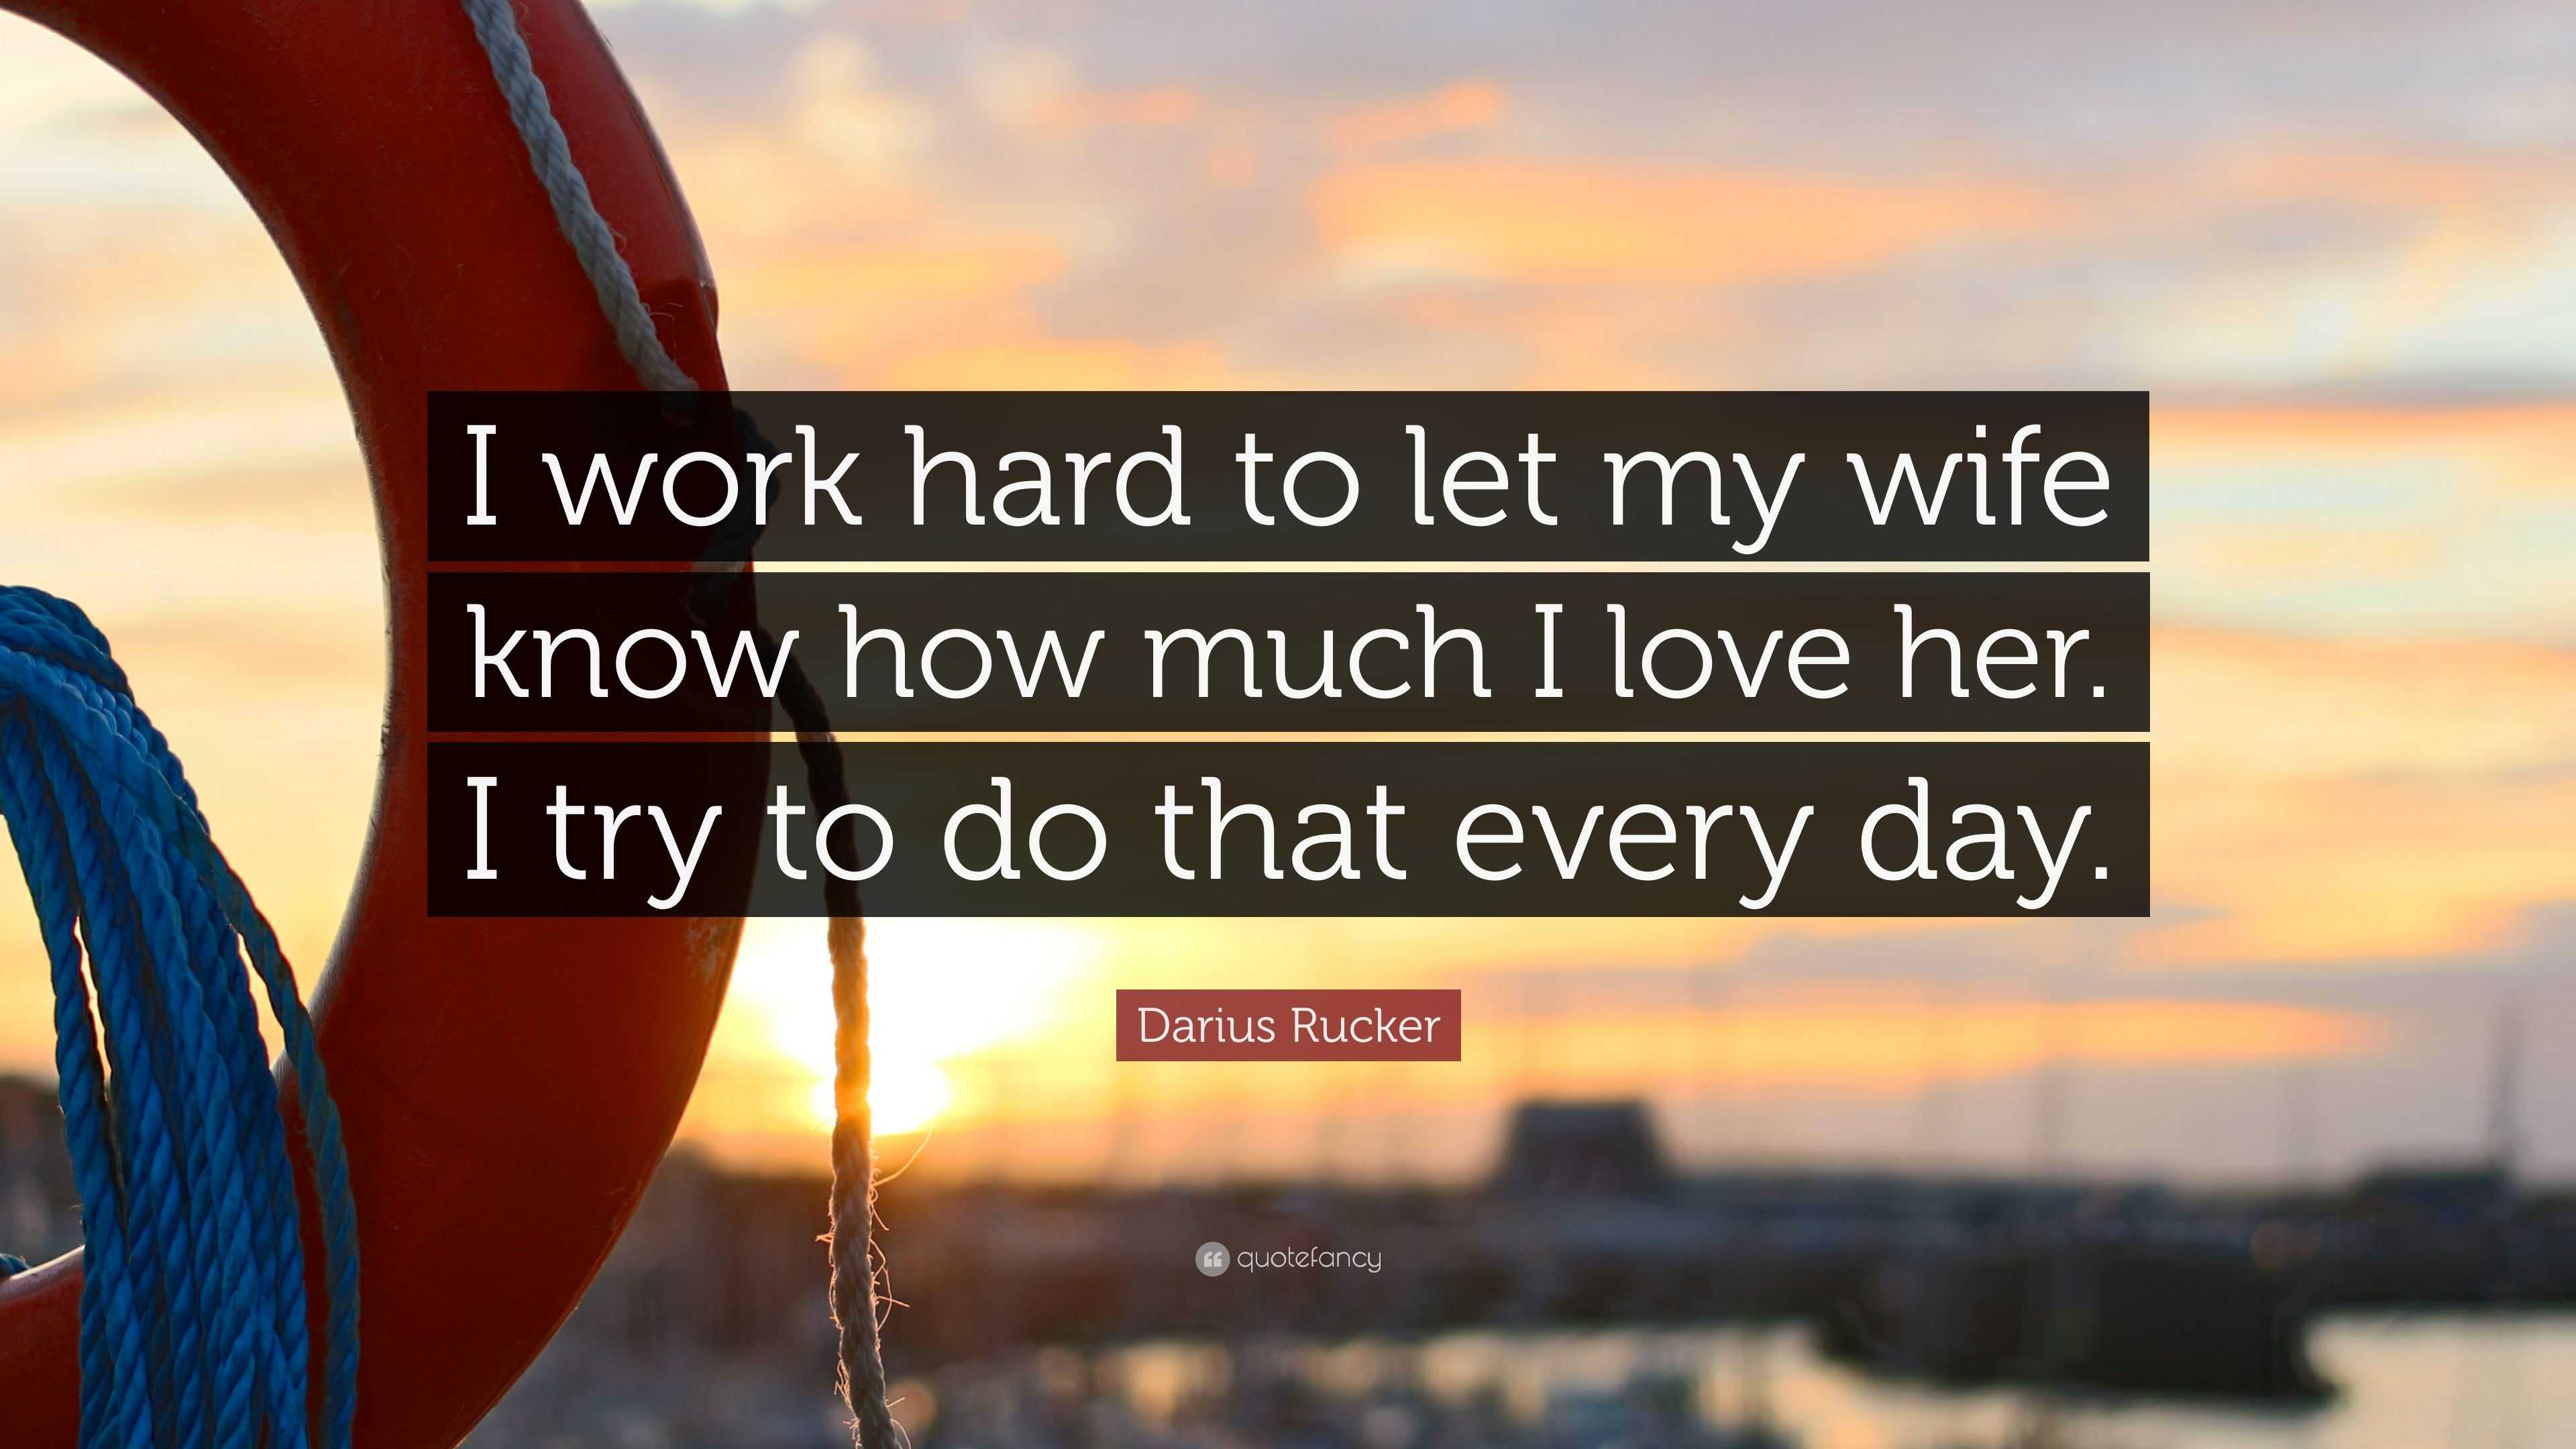 Darius Rucker Quote “I work hard to let my wife know how much I